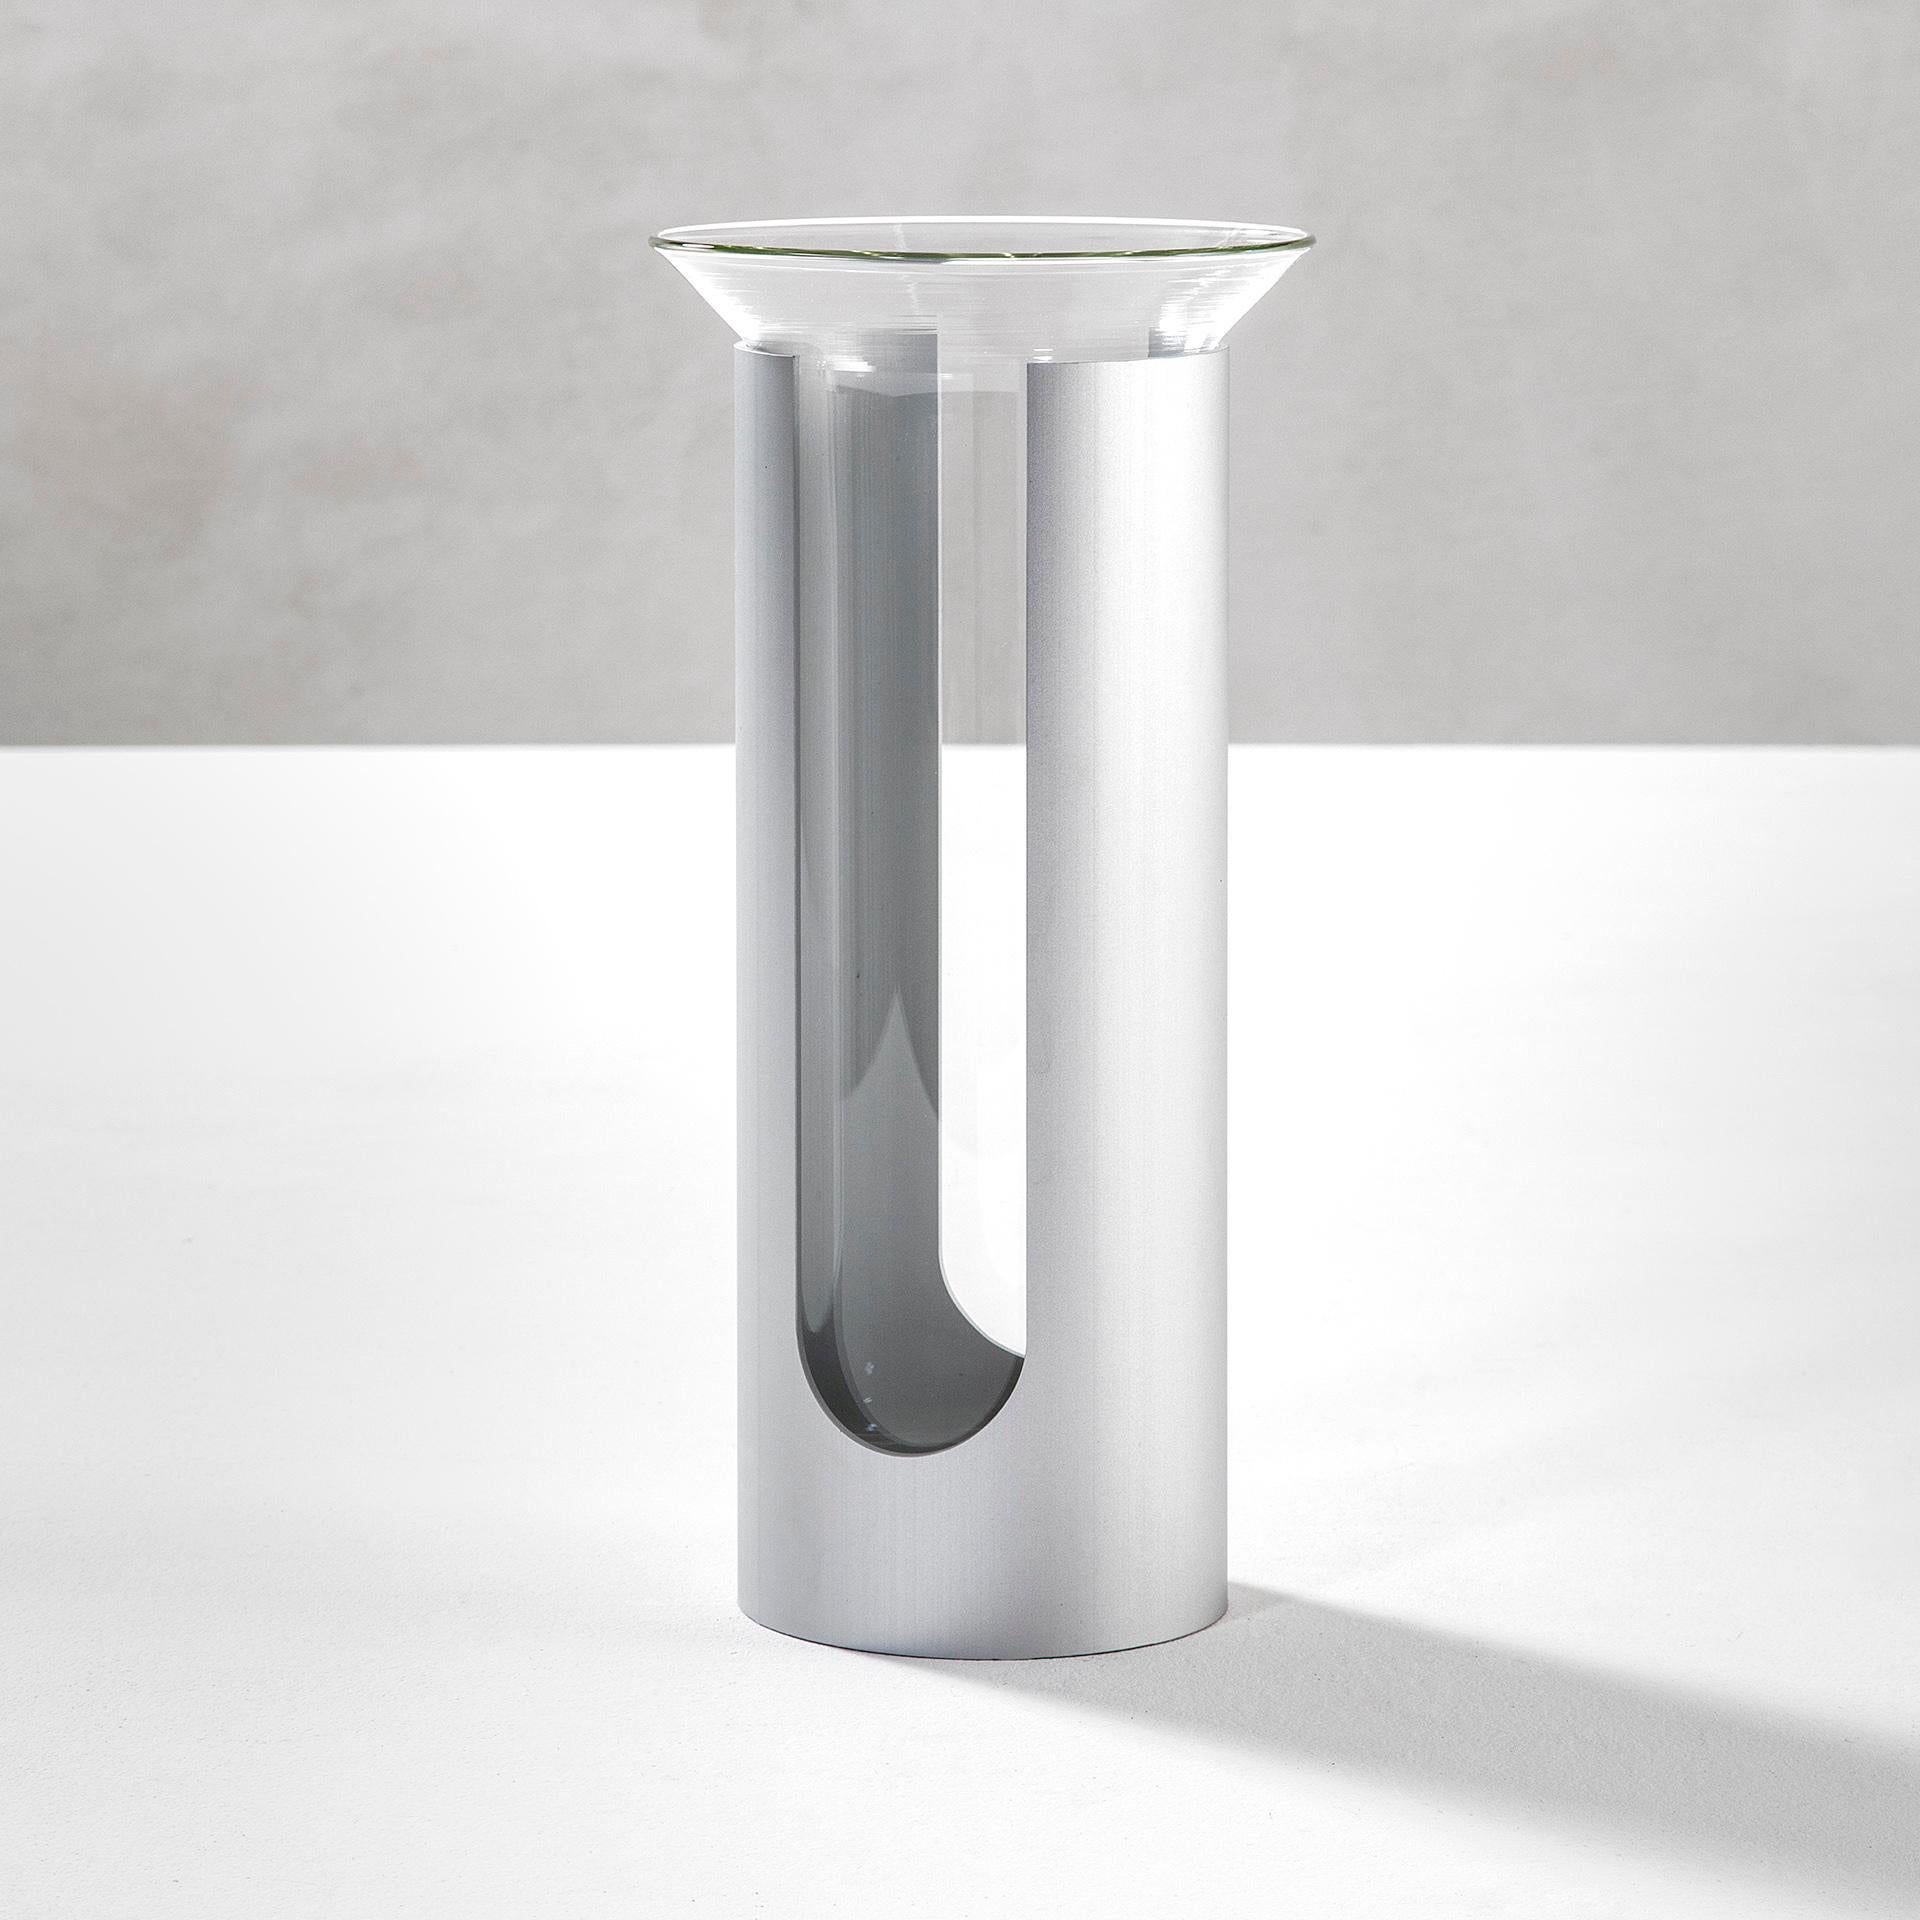 Camicia was designed by Enzo Mari in 1961. Camicia is a vase that consists of a double element: a cylinder of opaque anodized aluminum, bottomless, which supports and envelops a transparent glass container. The hole and the full-height vertical cut